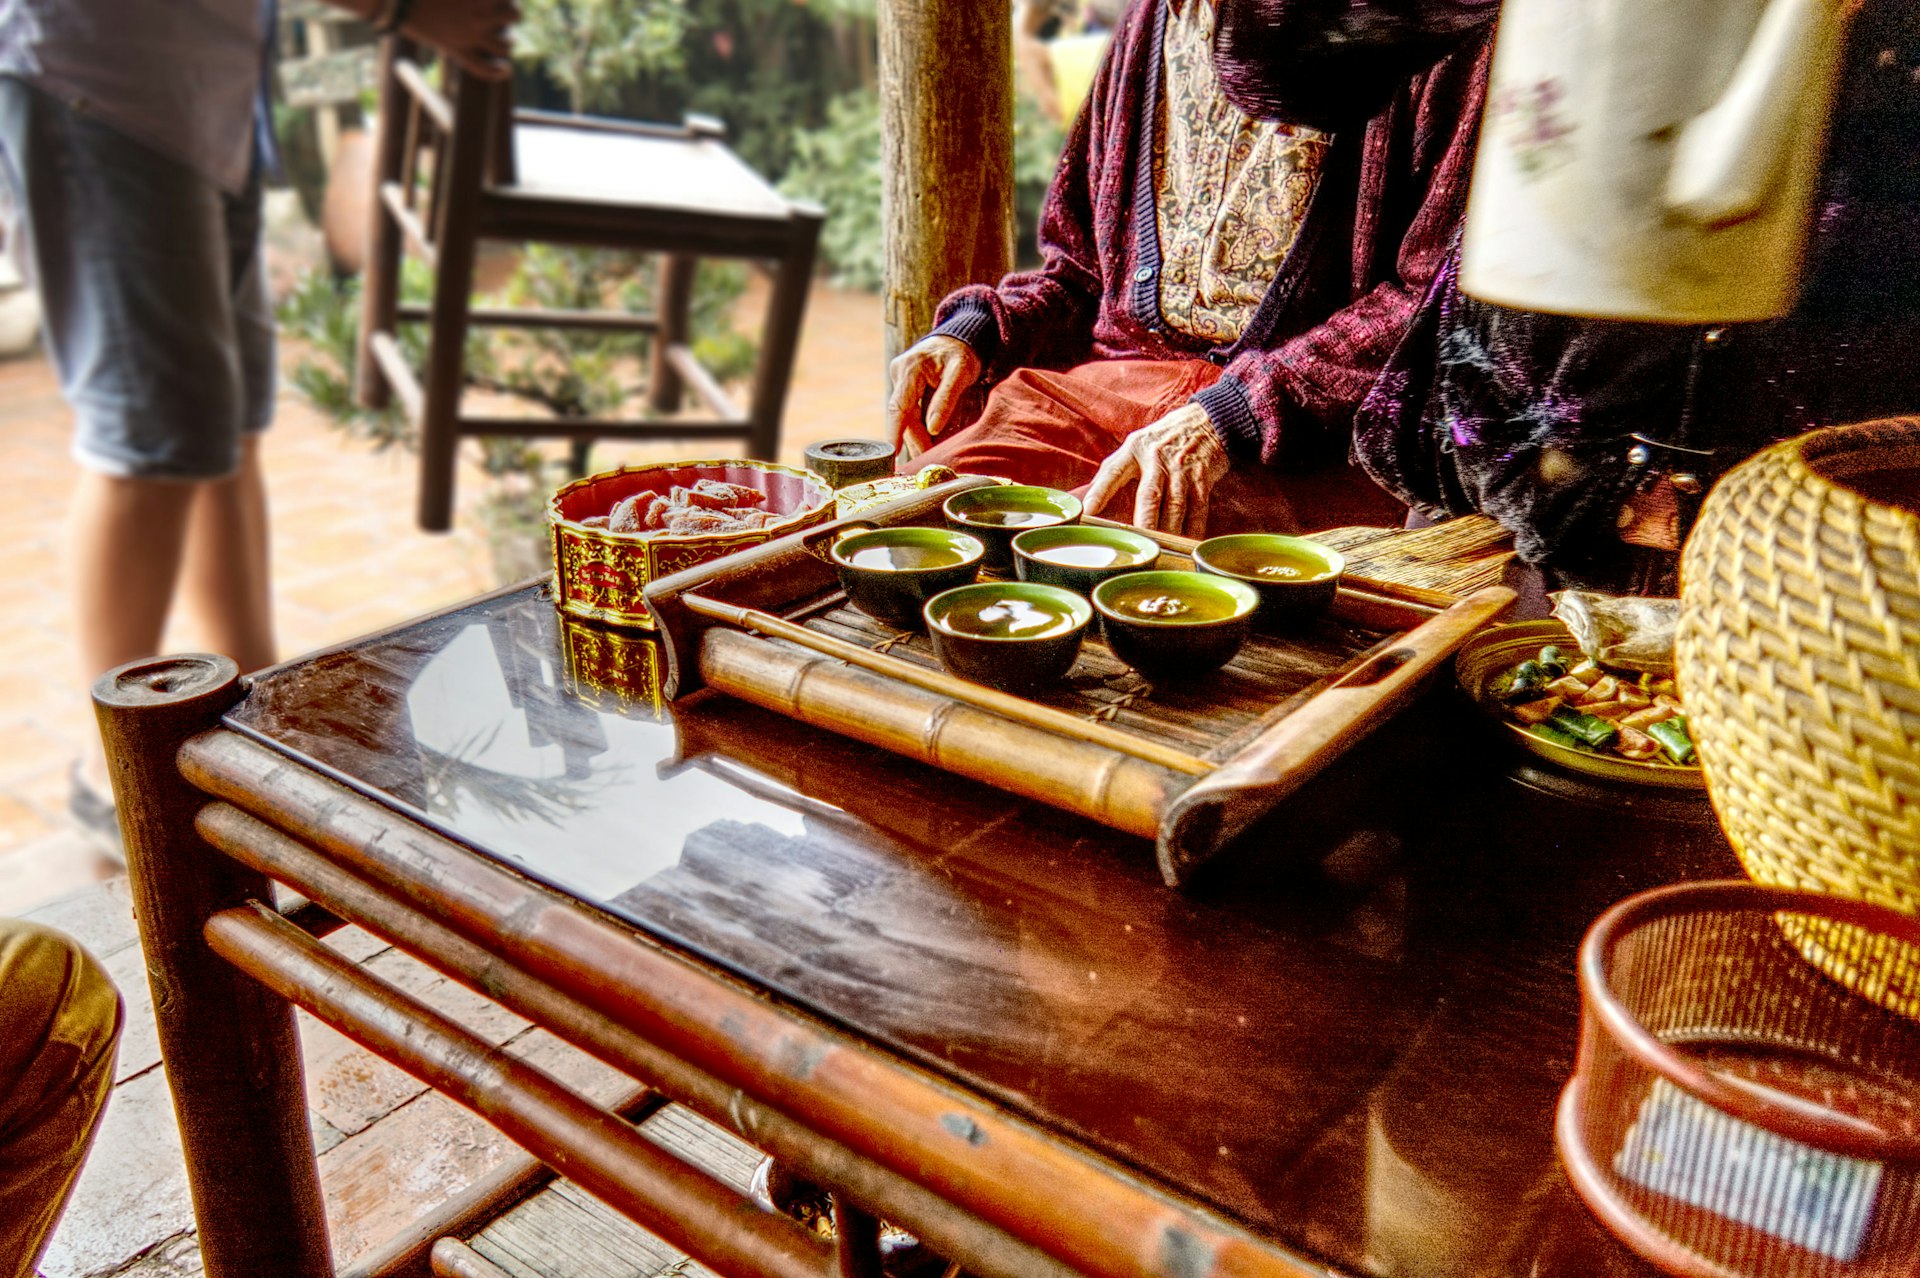 Green Tea and Ginger Candy being served in old village house in Vietnam